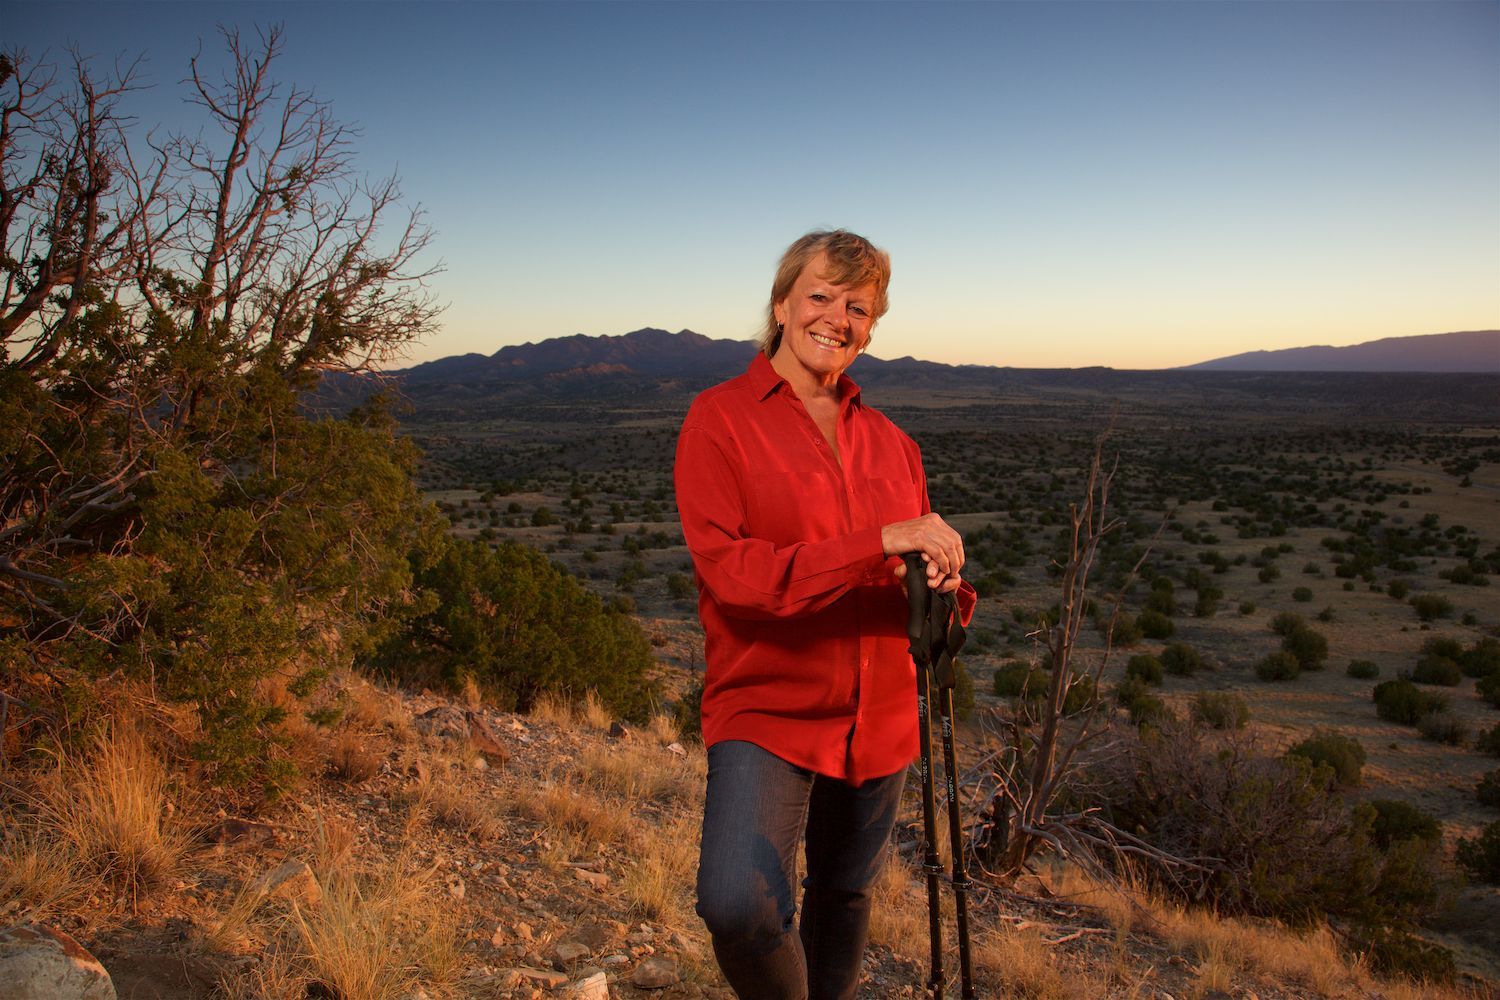 Jacquelyn Helin posing for a picture while on a hike in the desert of Santa Fe, New Mexico. She is resting on walking poles.